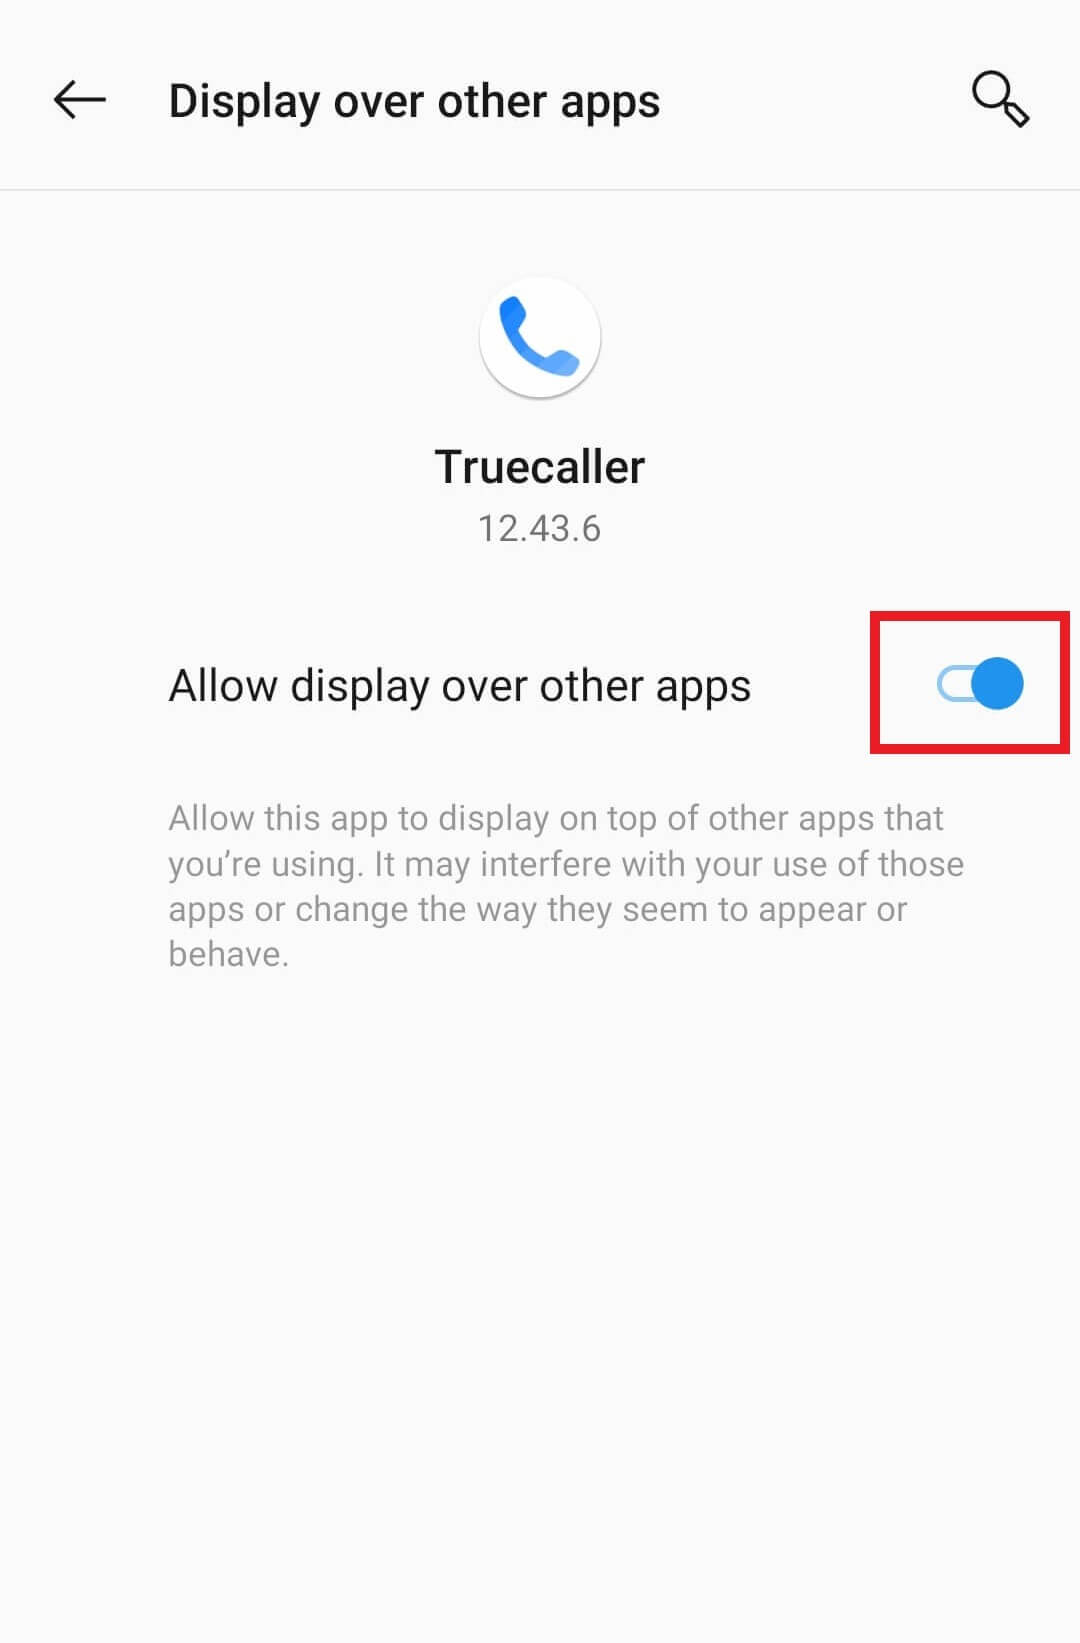 allow-over other apps